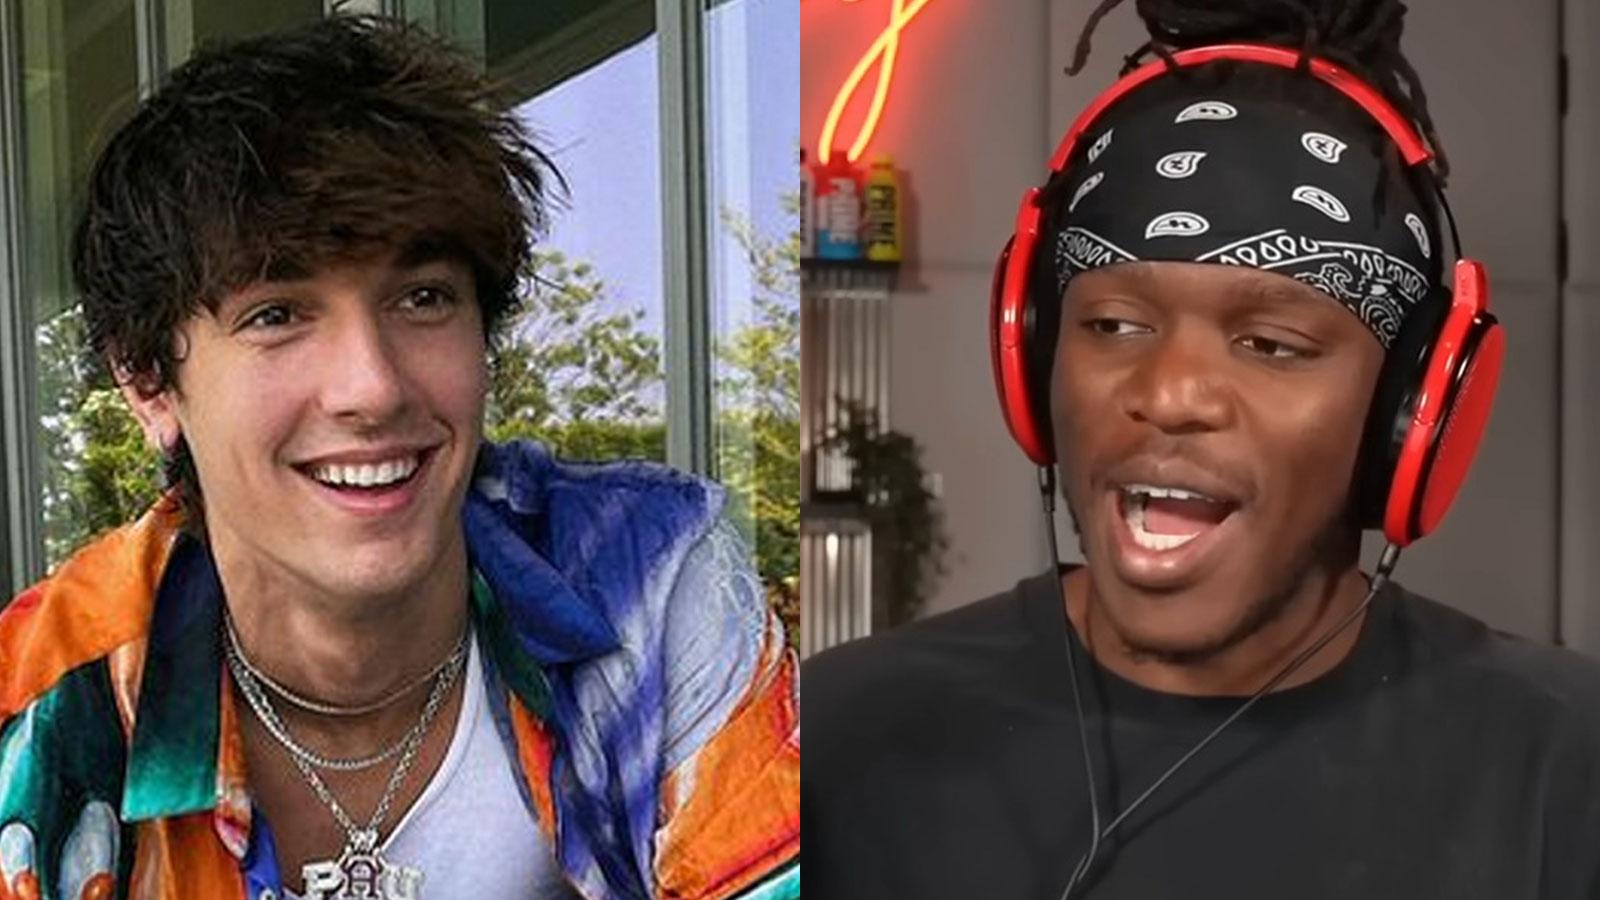 Image of KSI and Bryce Hall both smiling